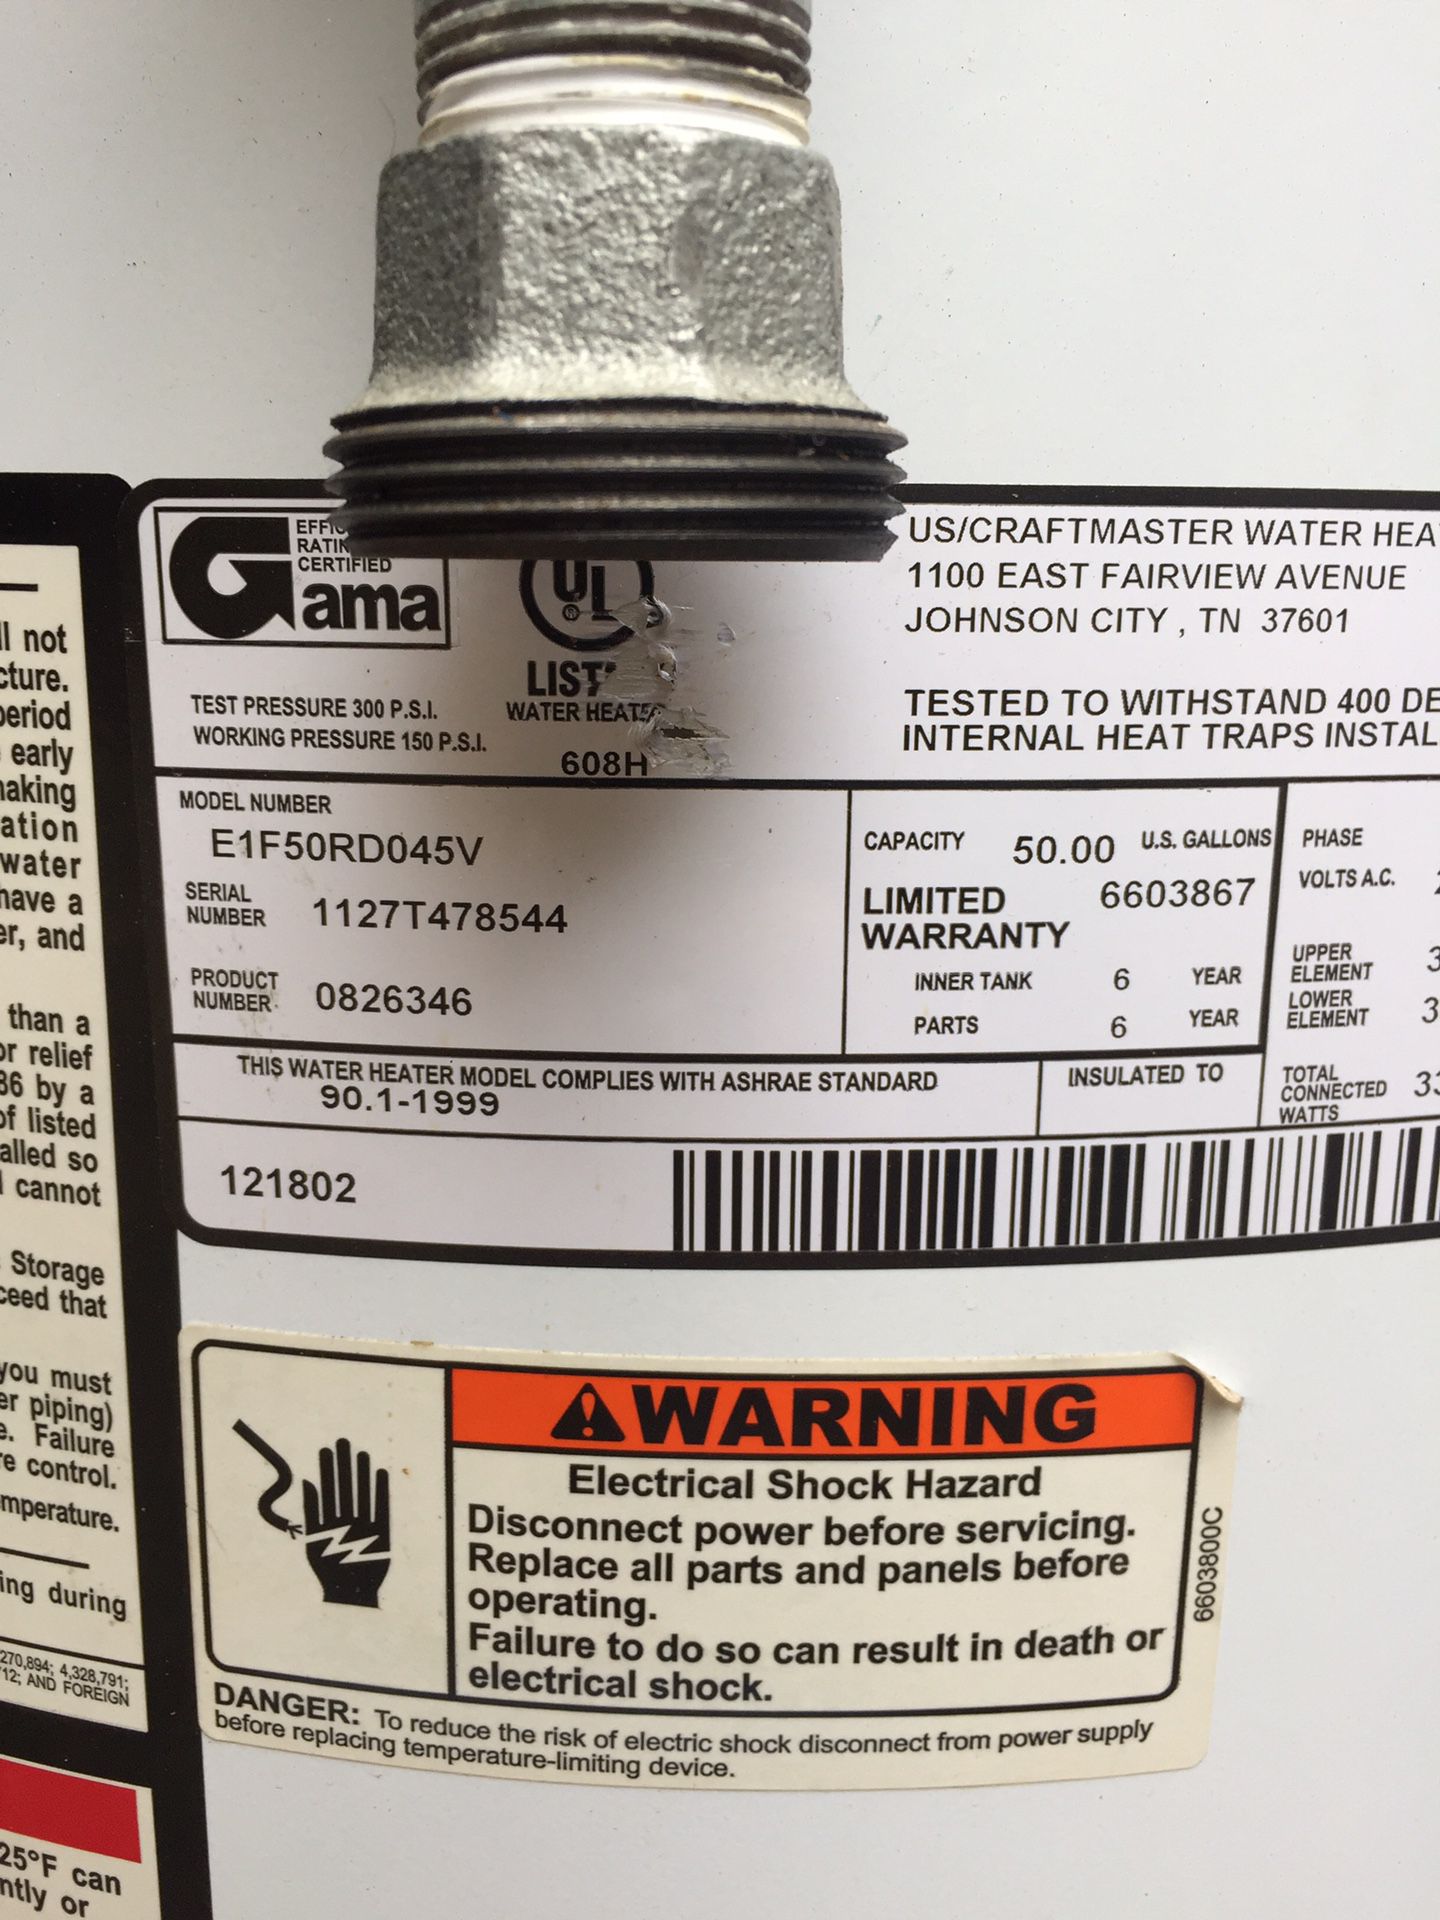 Hot water heater - electric